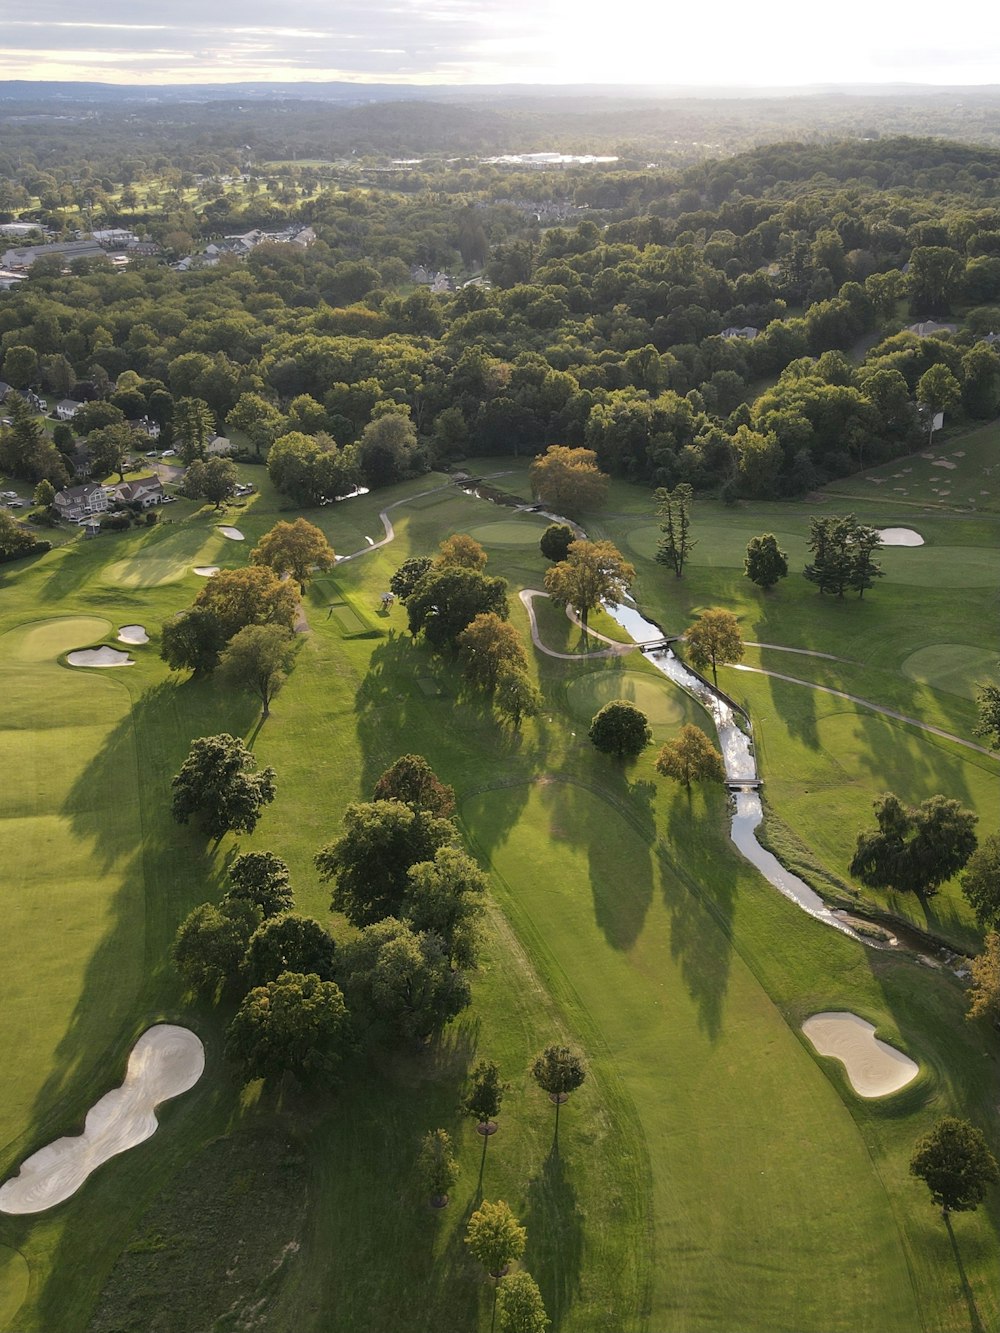 an aerial view of a golf course surrounded by trees